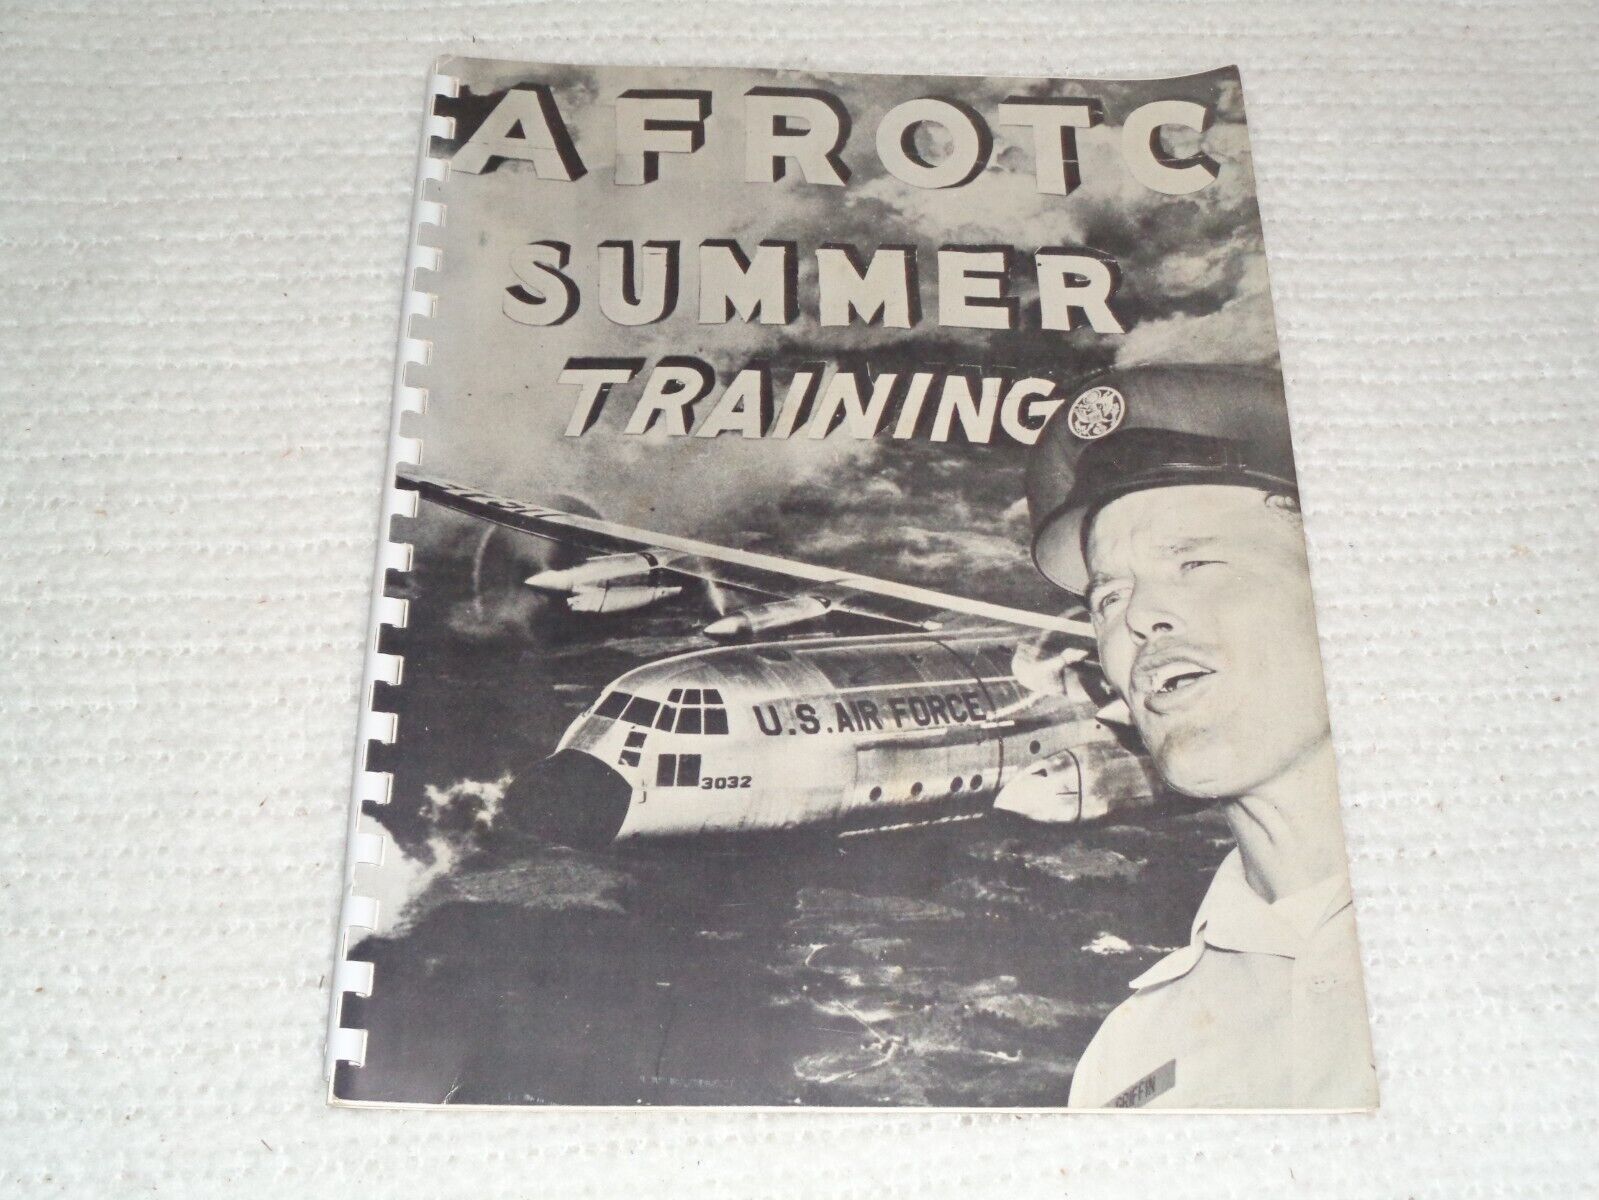 U.S. Air Force Reserve Officers Training Corps Sewart TN 1957 AFROTC Booklet